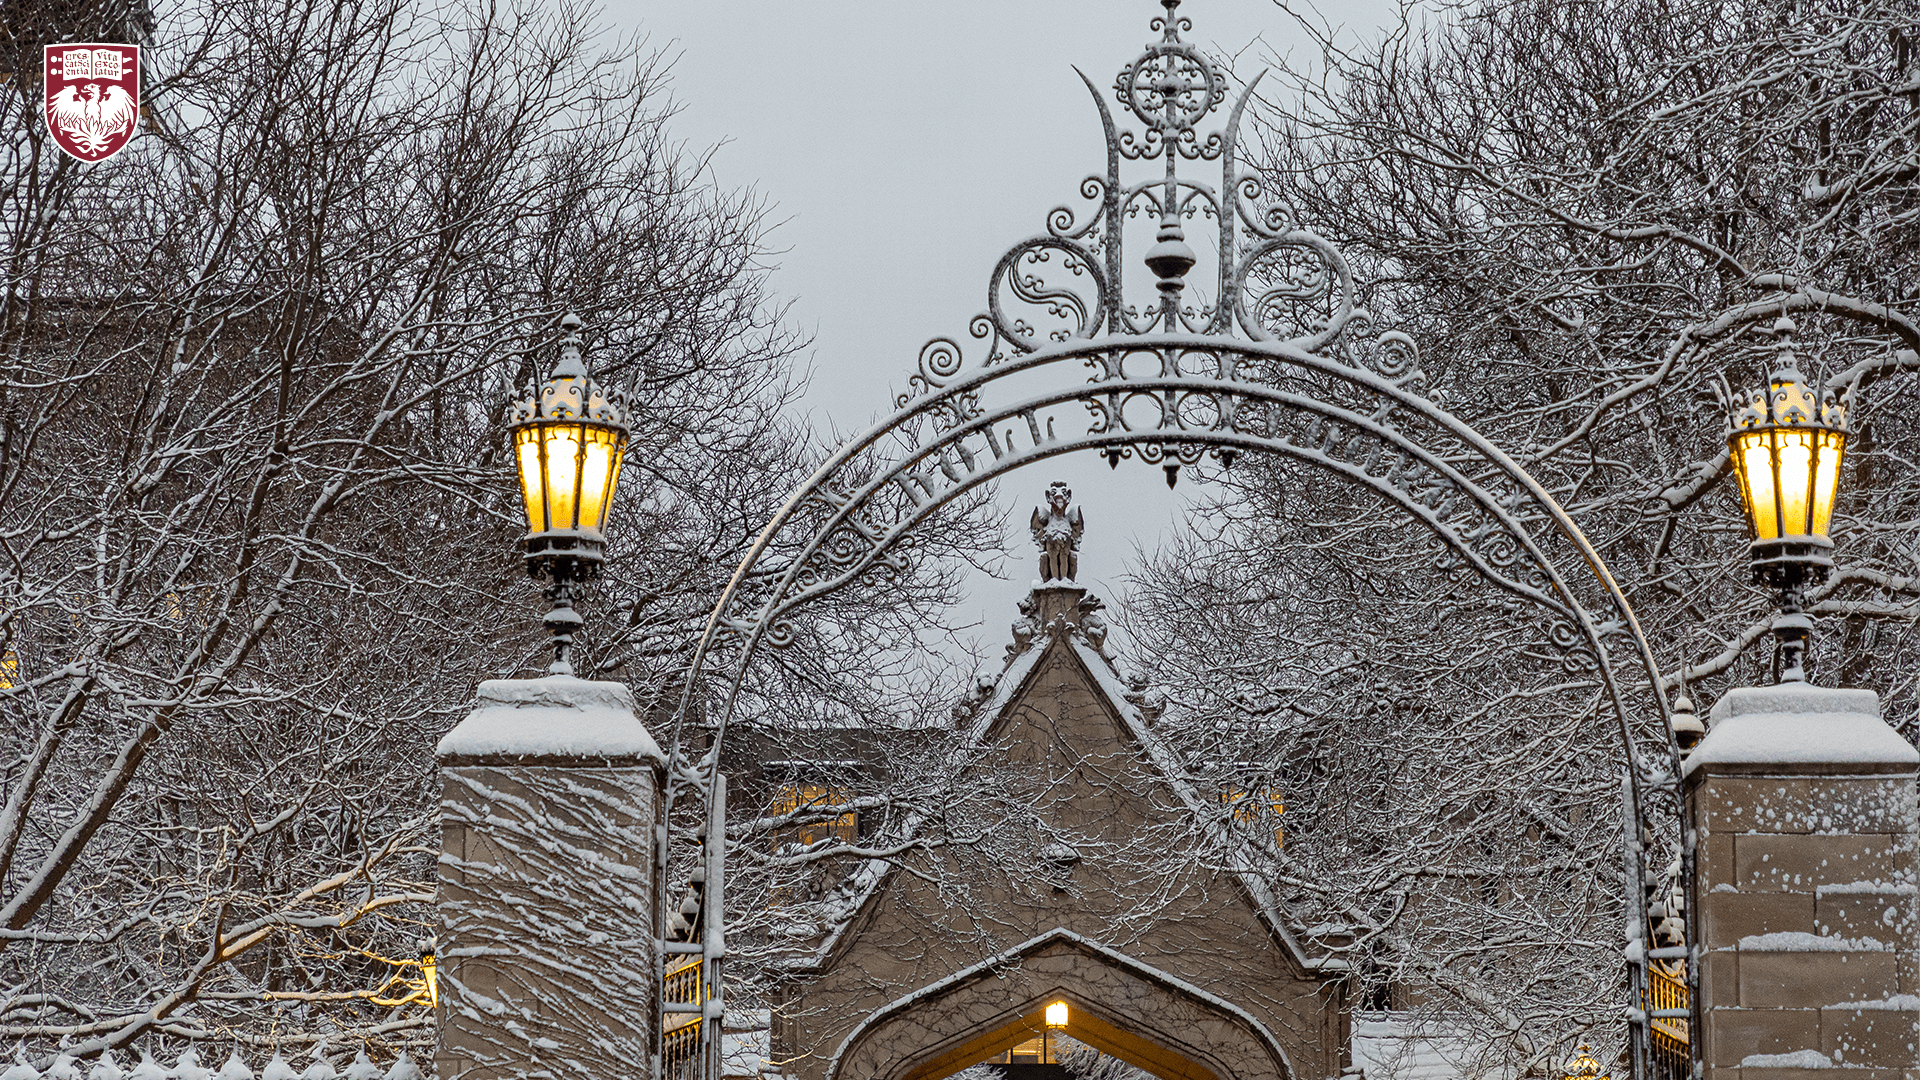 Snow covering iron gate arch and trees with glowing lamps on either side of the gate